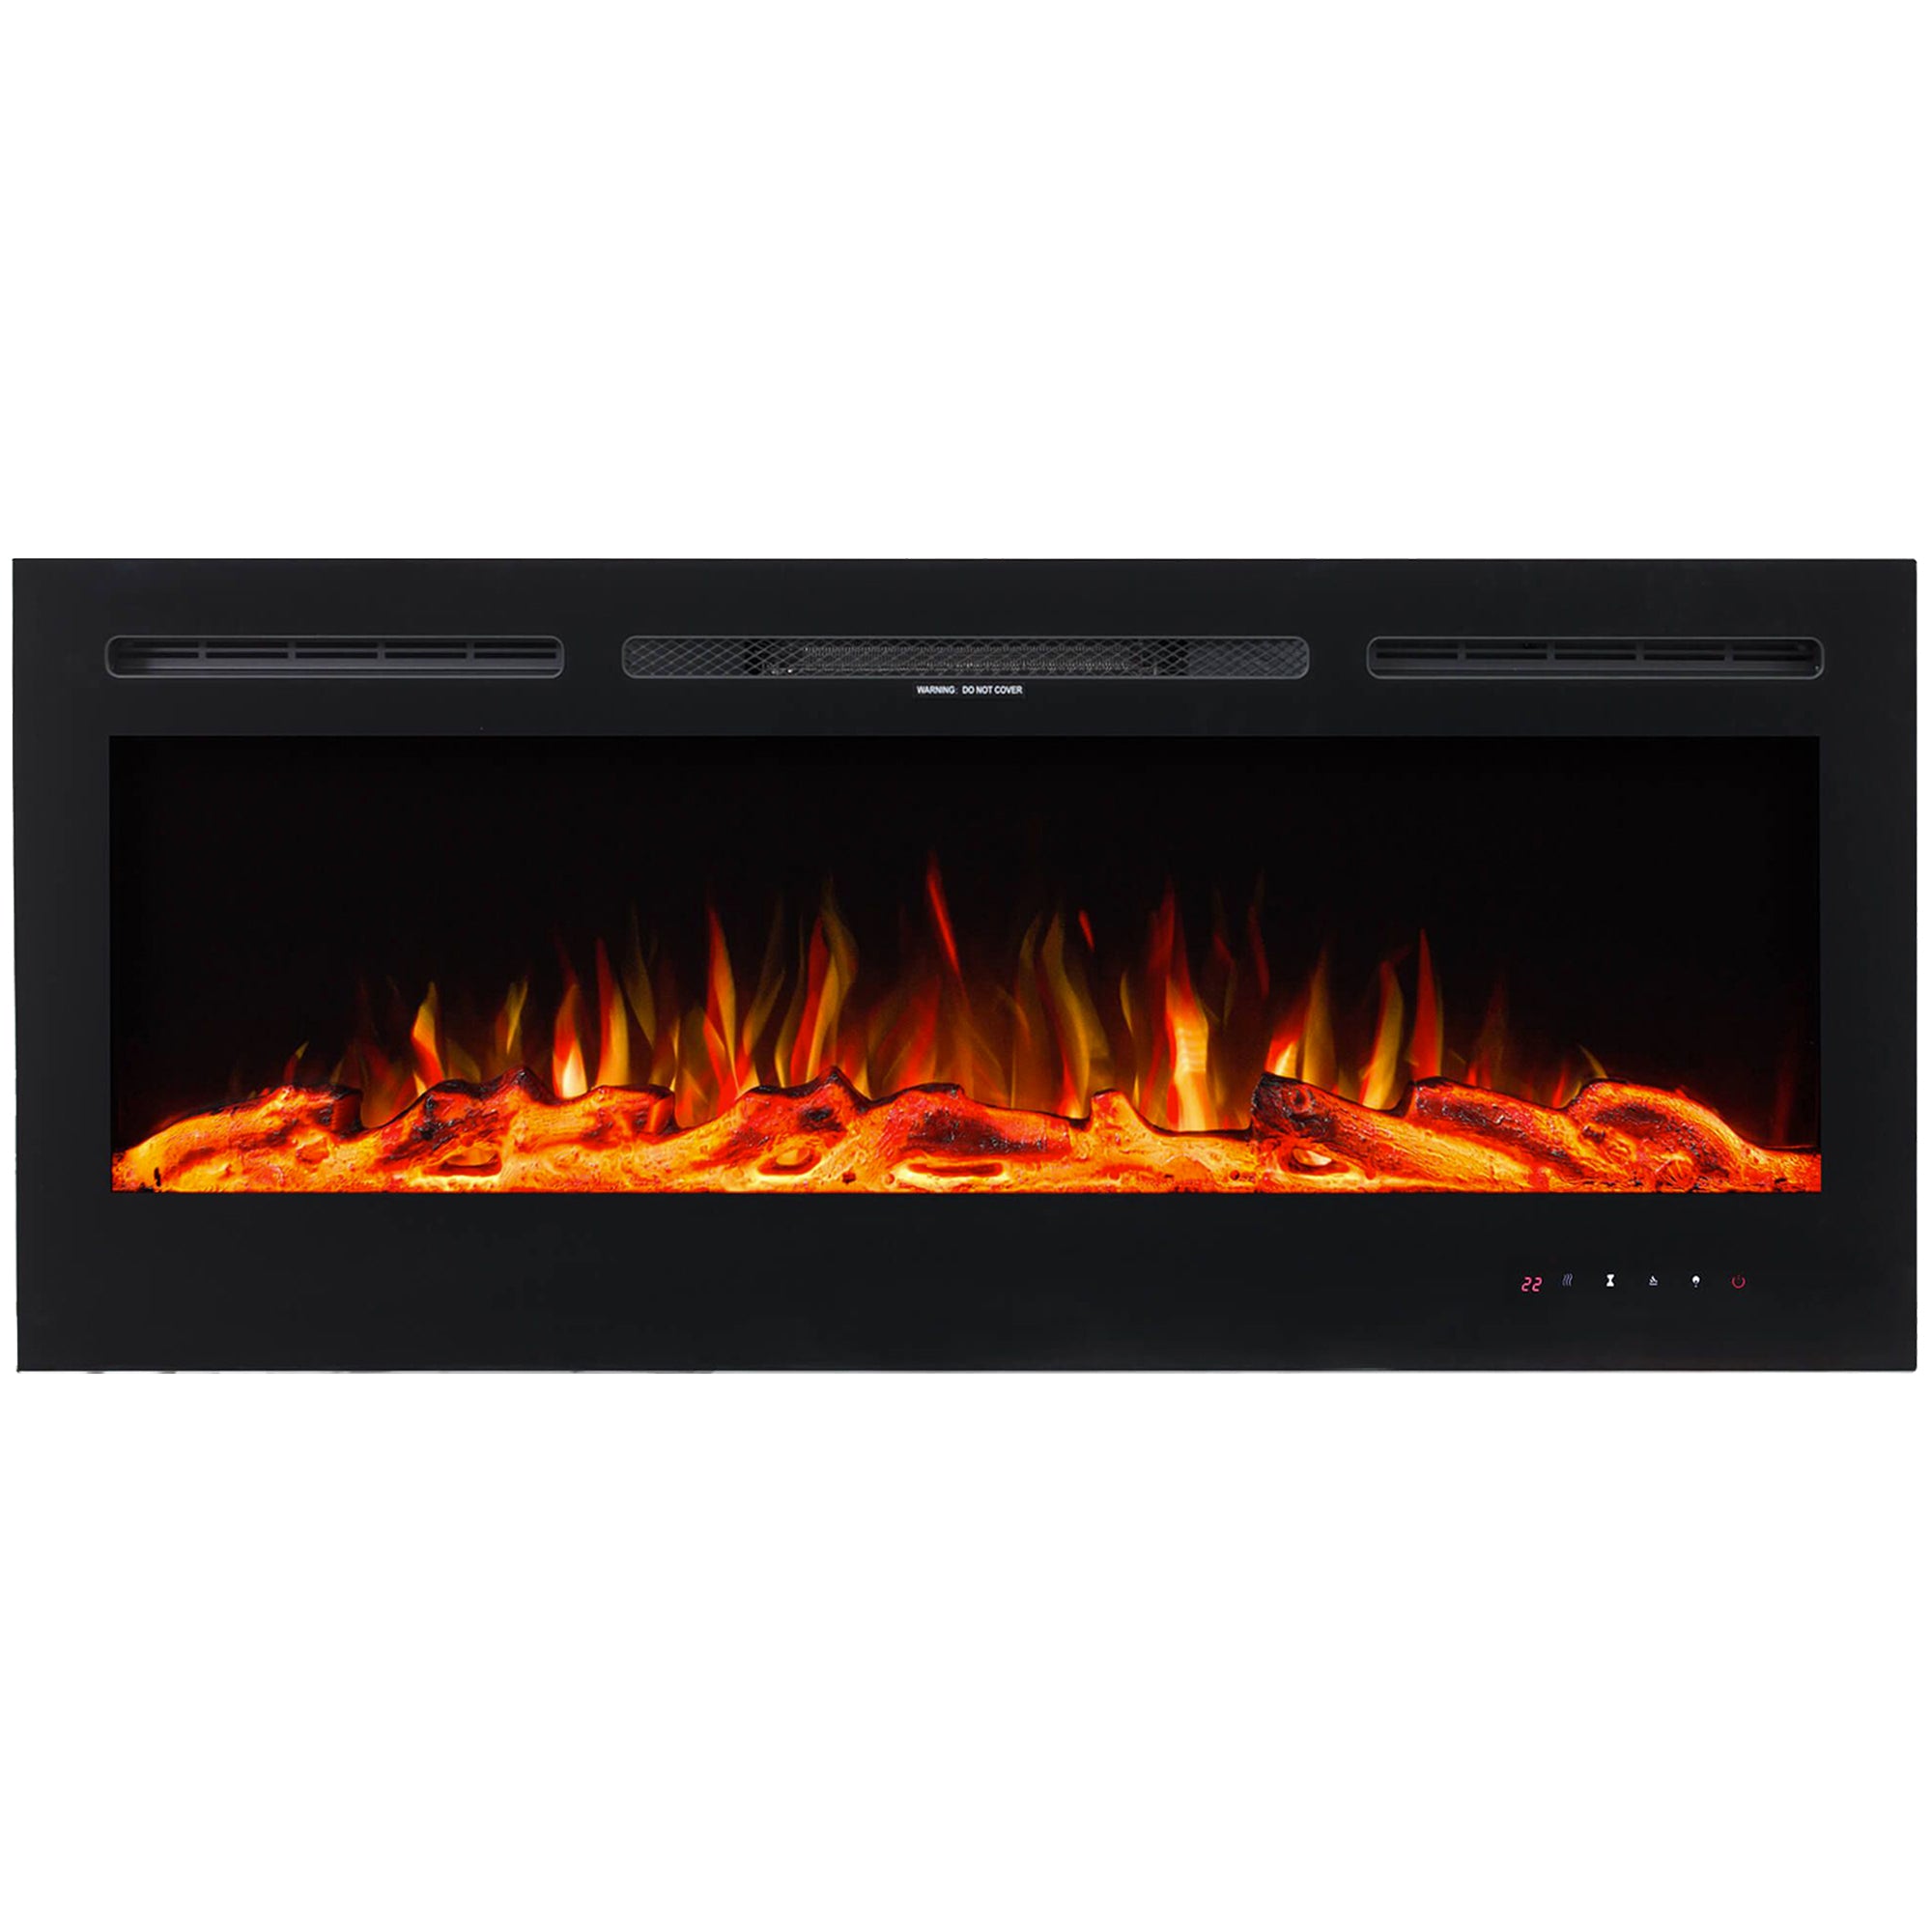 NETTA 50" Glass Panel Electric Fireplace with Colourful Flame effect